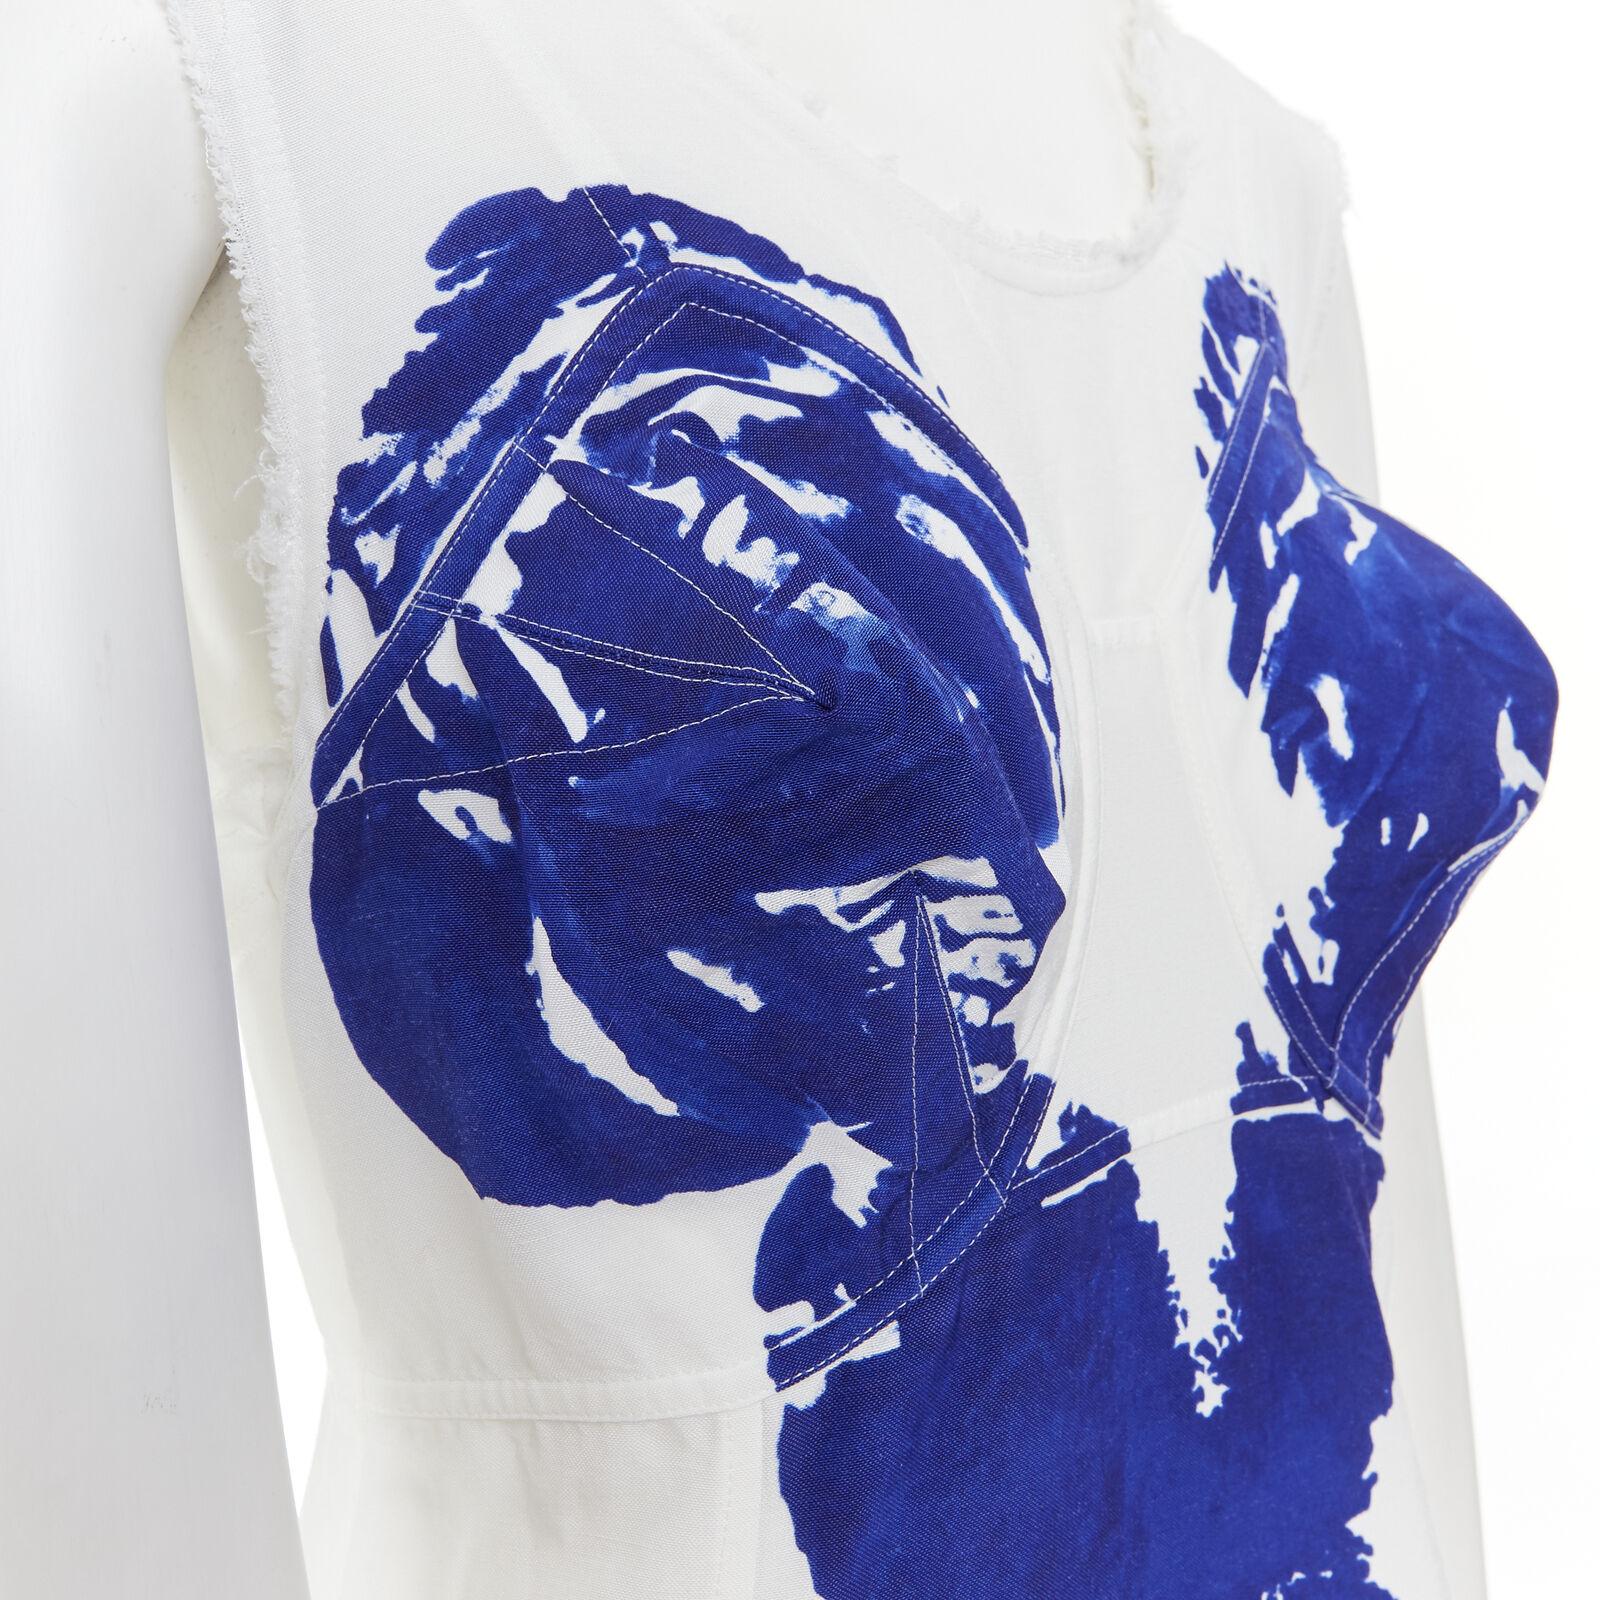 new CELINE PHOEBE PHILO 2017 Yves Klein body print cotton dress FR34 XS 
Reference: TGAS/A06032 
Brand: Celine 
Designer: Phoebe Philo 
Collection: Spring Summer 2017 Runway 
Material: Cotton 
Color: White 
Pattern: Solid 
Closure: Zip 
Extra